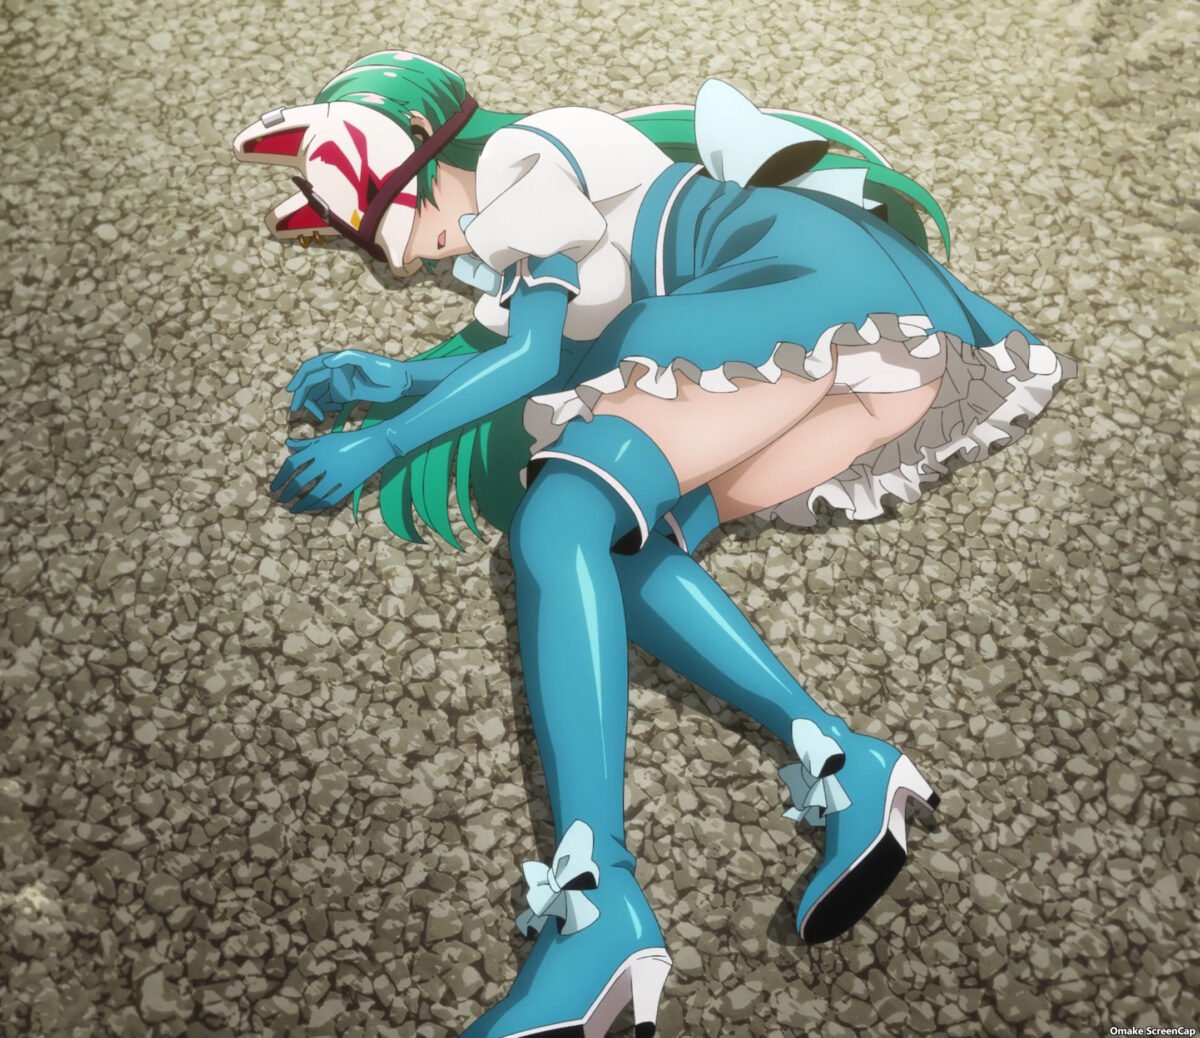 Gushing Over Magical Girls Episode 2 Magia Azure Exhausted Defeat